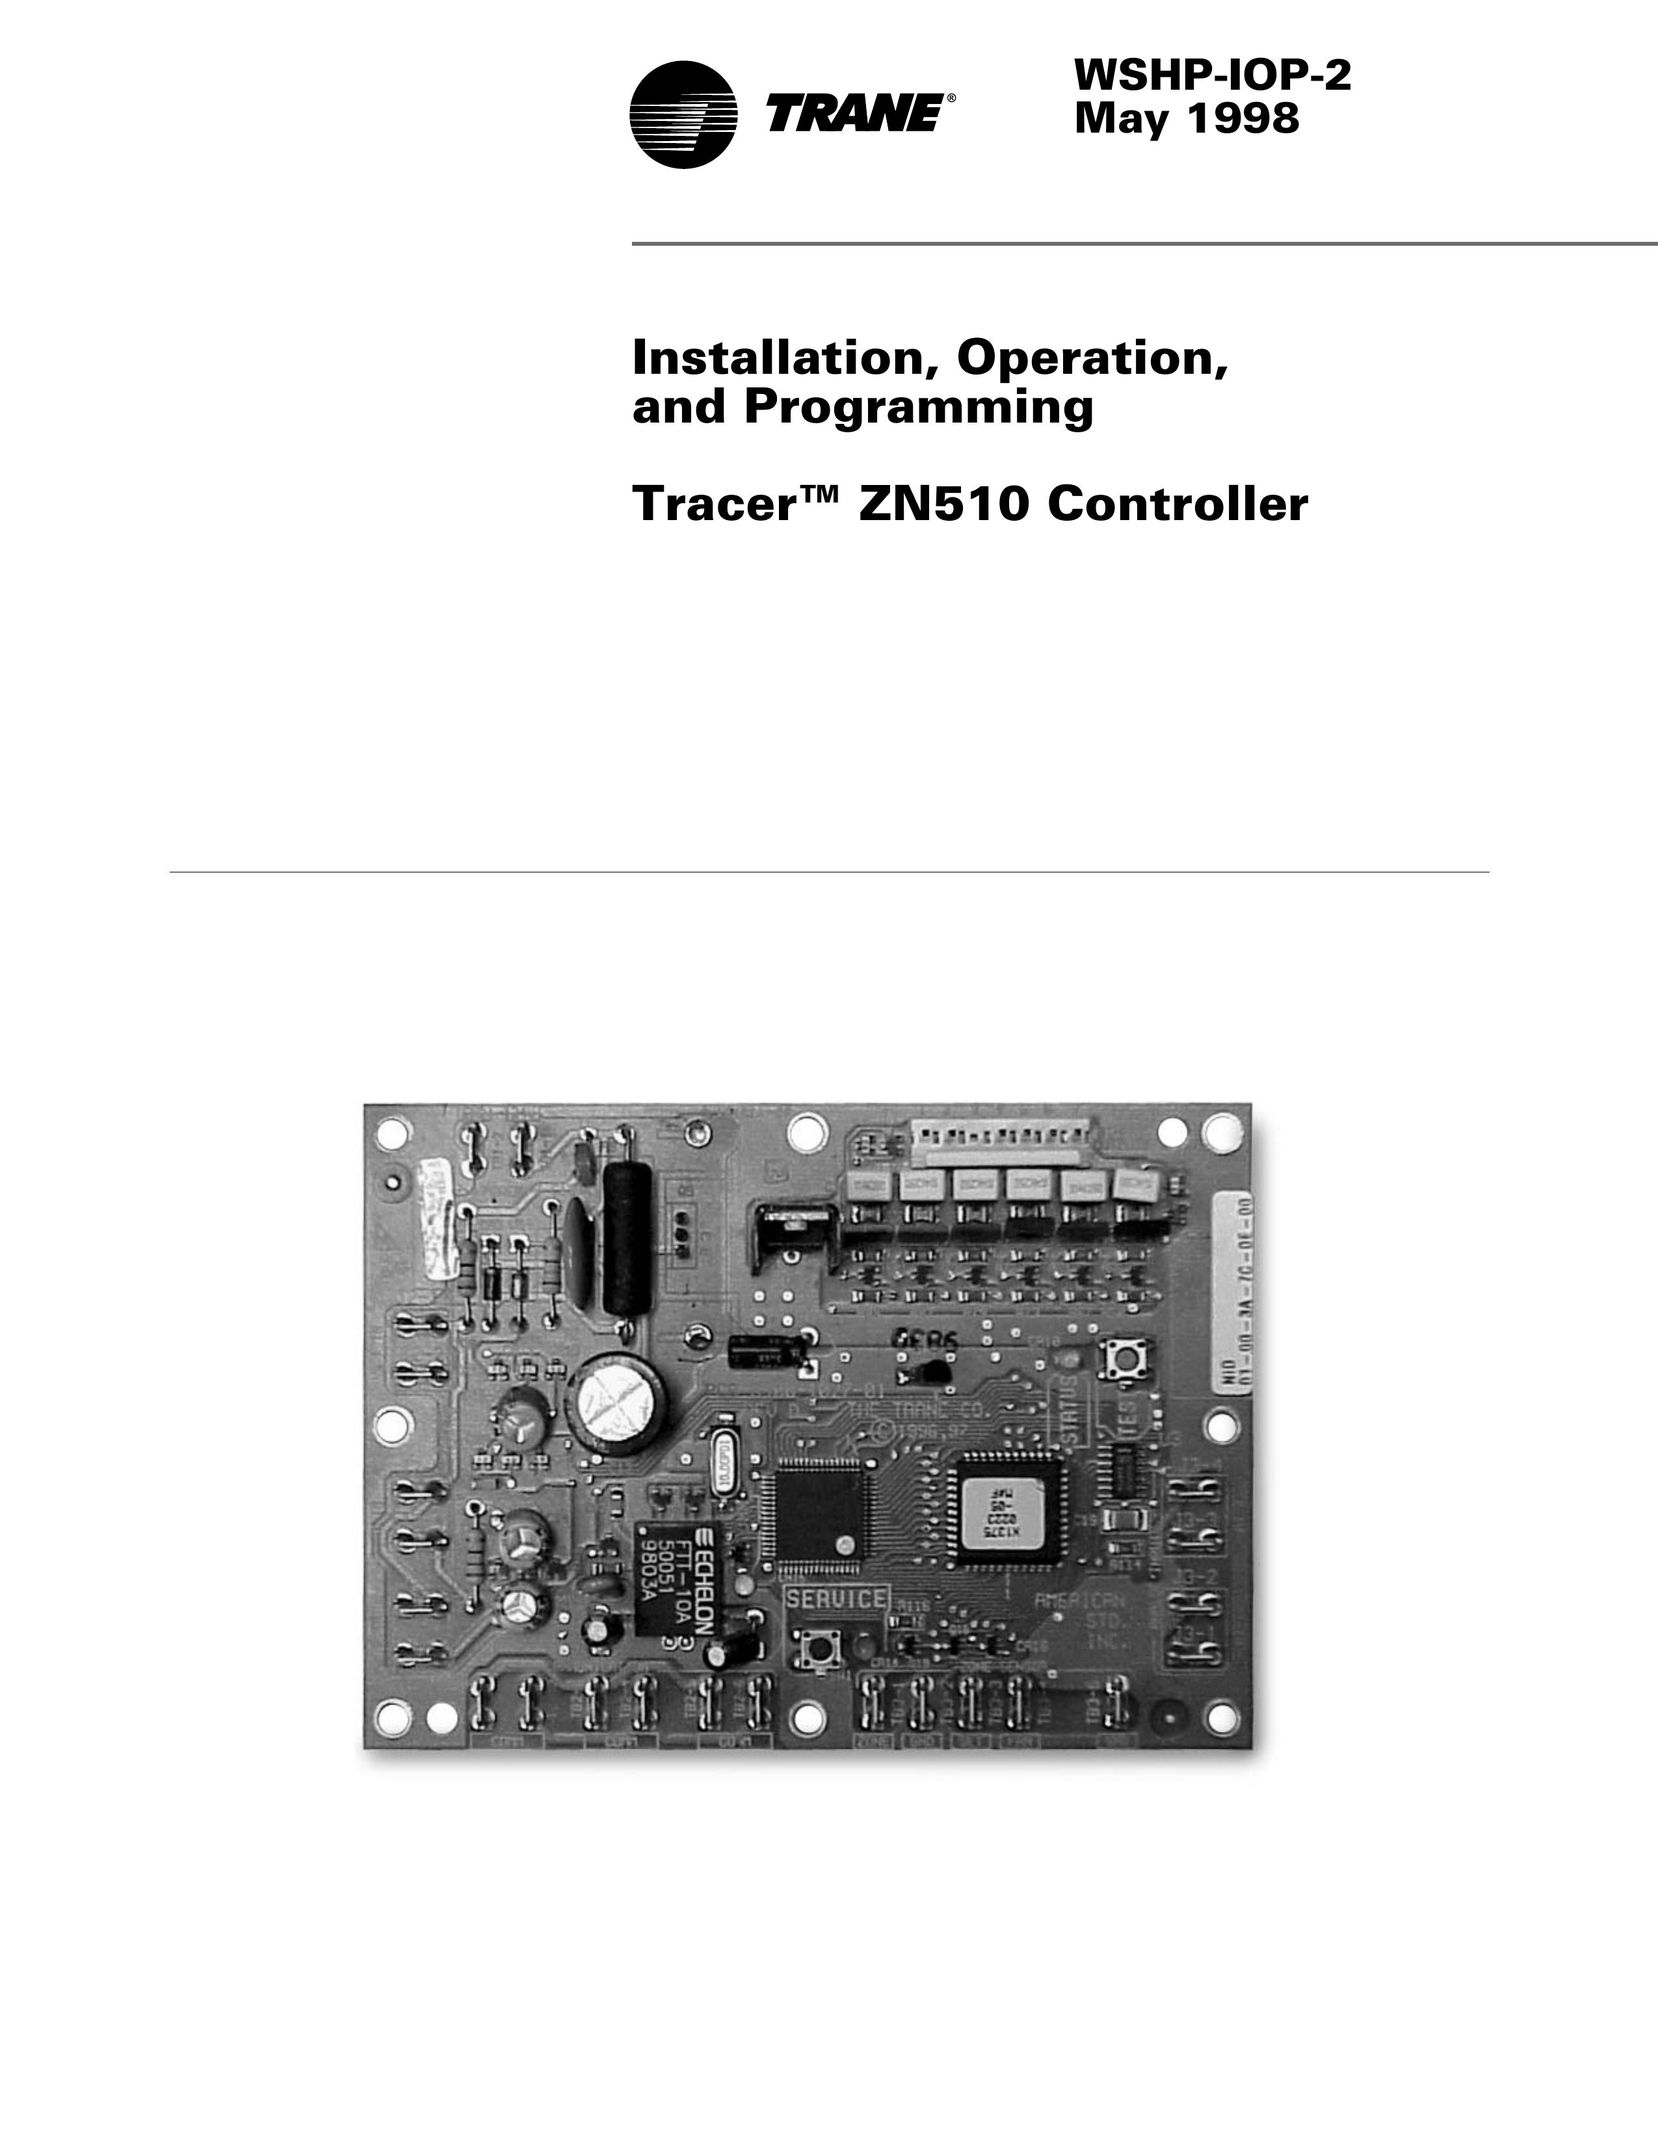 Trane Tracer Video Game Controller User Manual